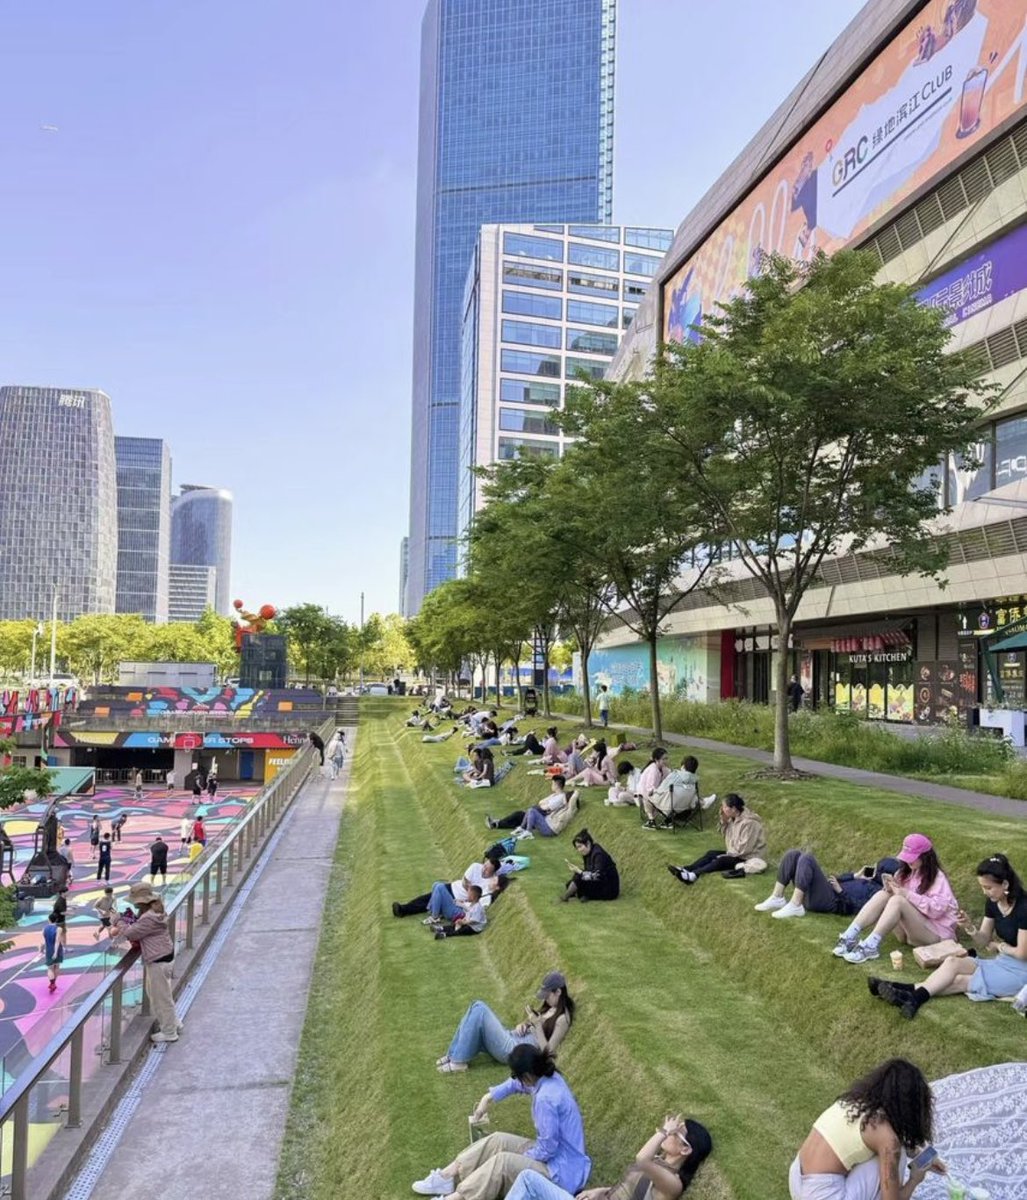 thinking about how perfect this urbanscape in Shanghai is:

- tiered lawn with ergonomics to support lounging and naps without it being awkward
- positioned right below trees for shade
- overseeing a plaza where people dance and exercise for maximal people-watching capabilities